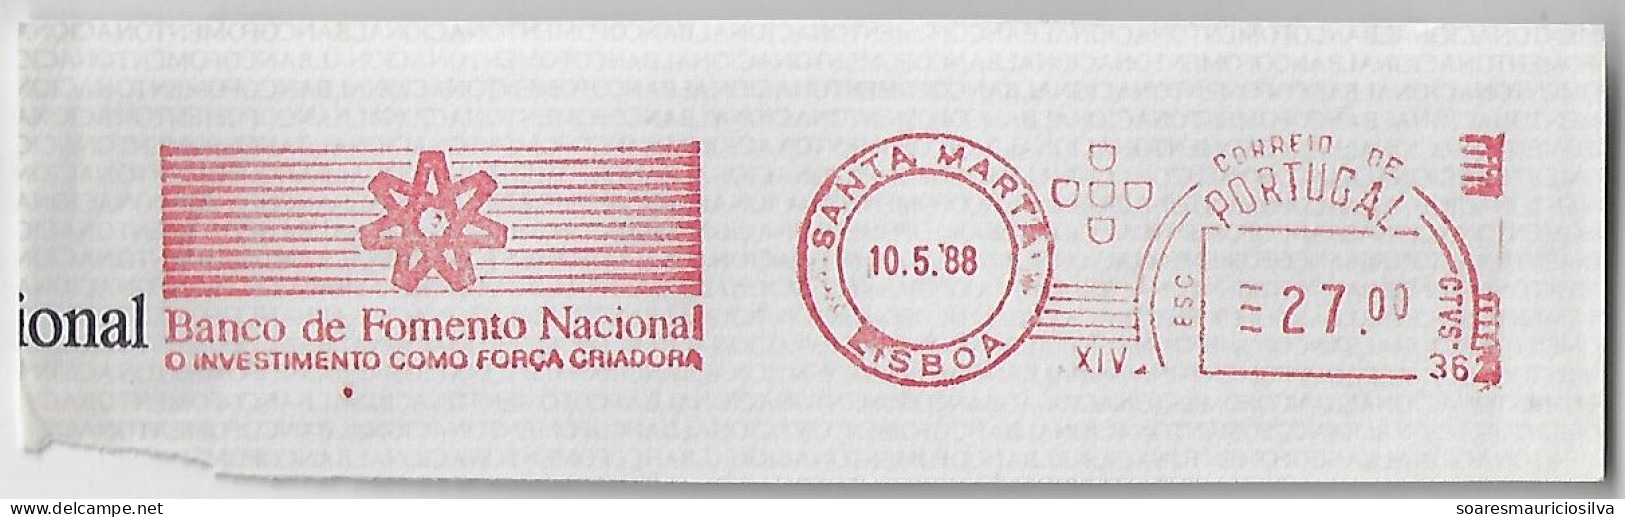 Portugal 1988 Cover Fragment Meter Stamp Pitney Bowes GB 5000 slogan National Development Bank From Lisboa Santa Marta - Covers & Documents